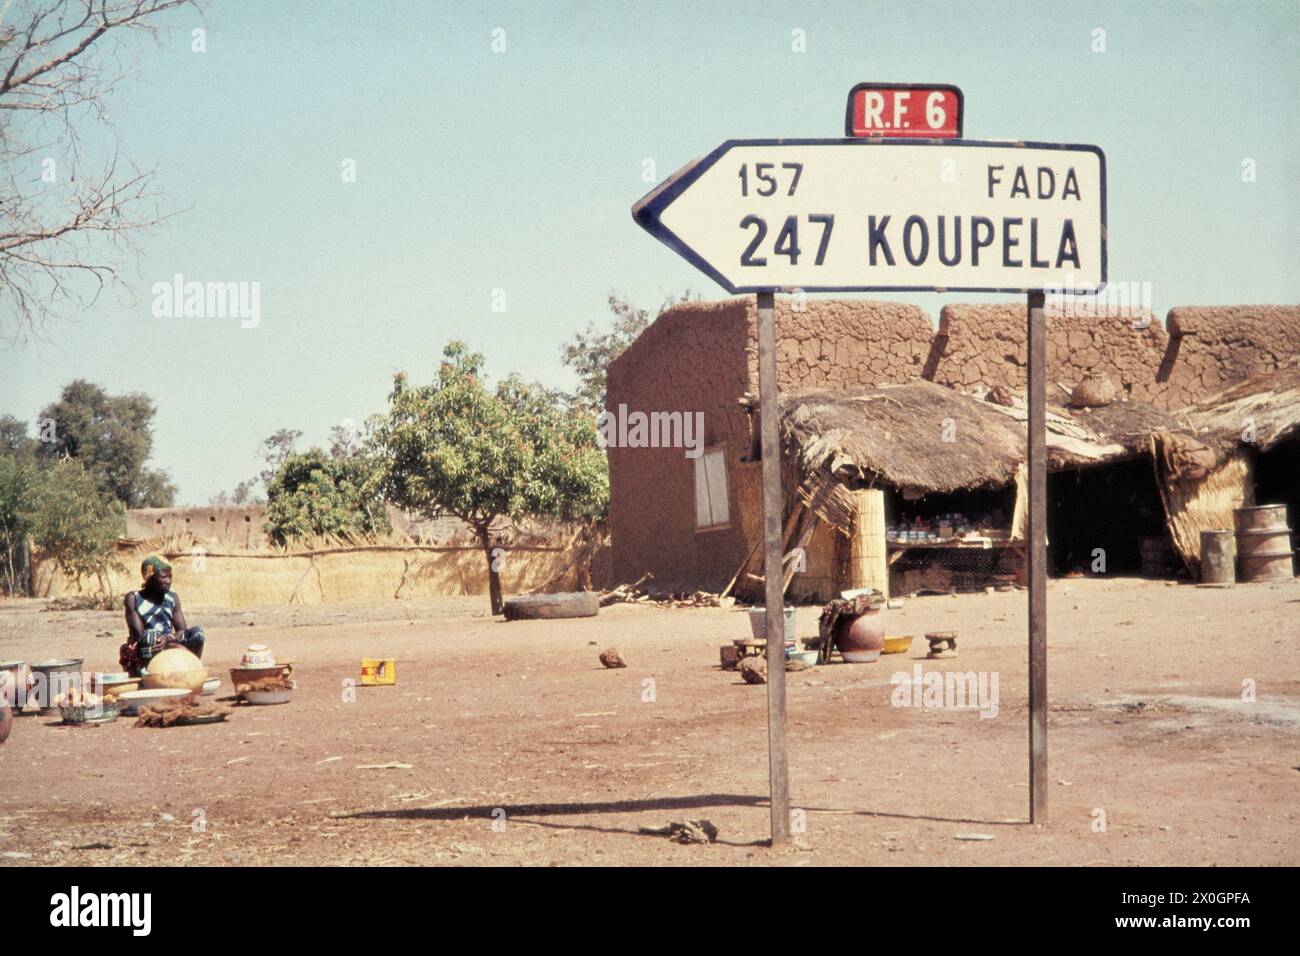 A road sign in Rapadama shows the direction and distance to Koupela and Fada. [automated translation] Stock Photo